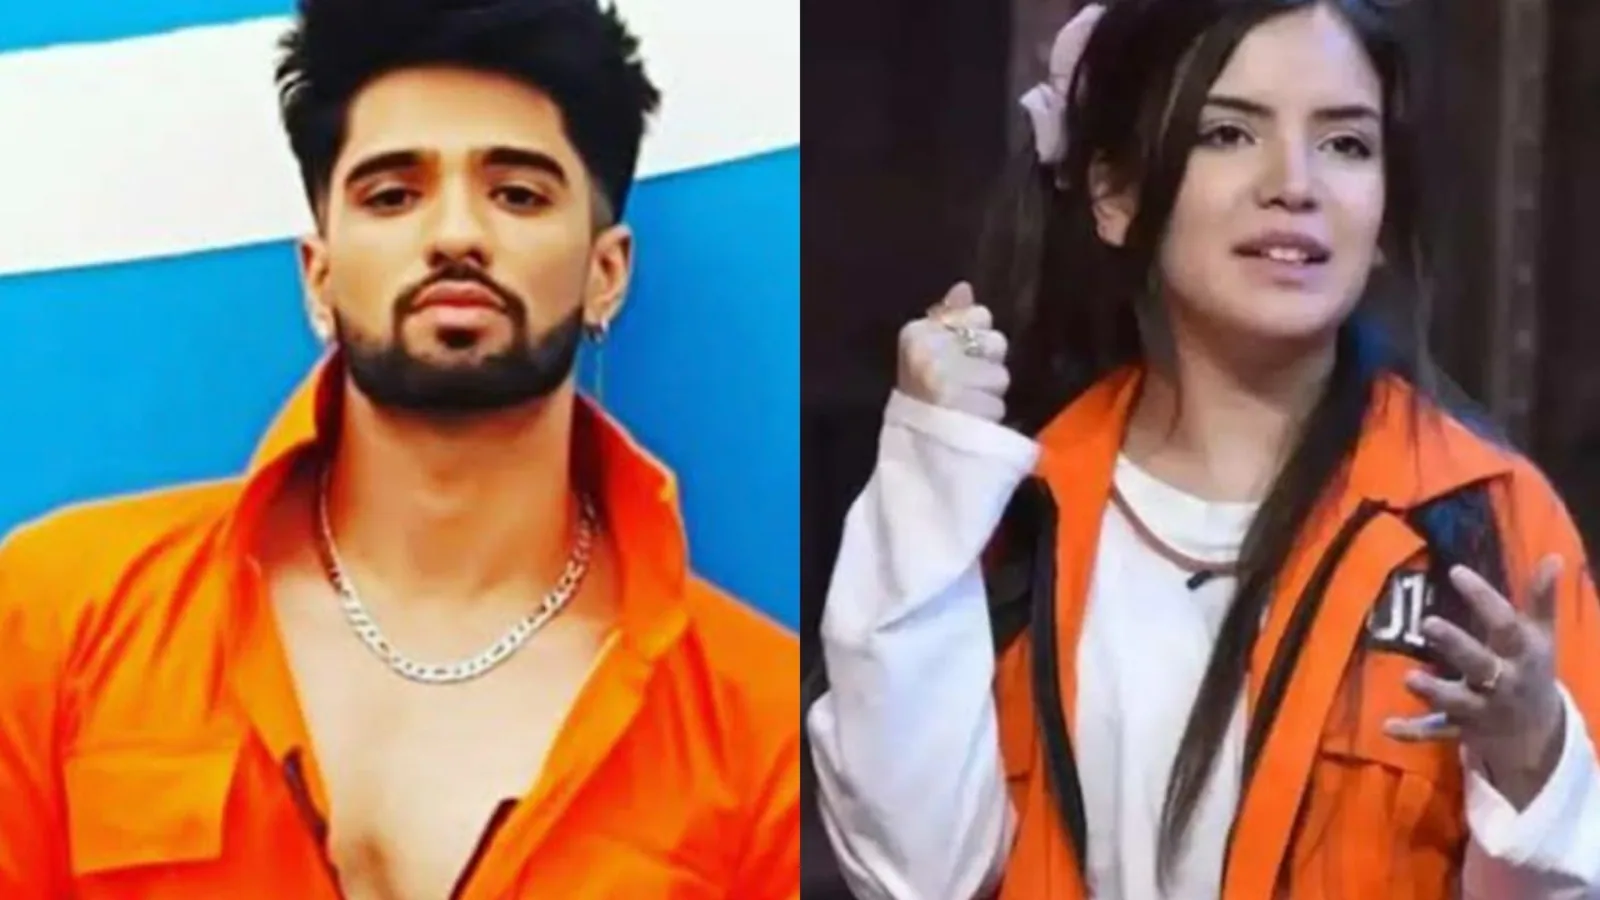 Lock Upp: Zeeshan Khan reacts to being ousted from the show for hitting Azma Fallah, says ‘her actions were wrong too’